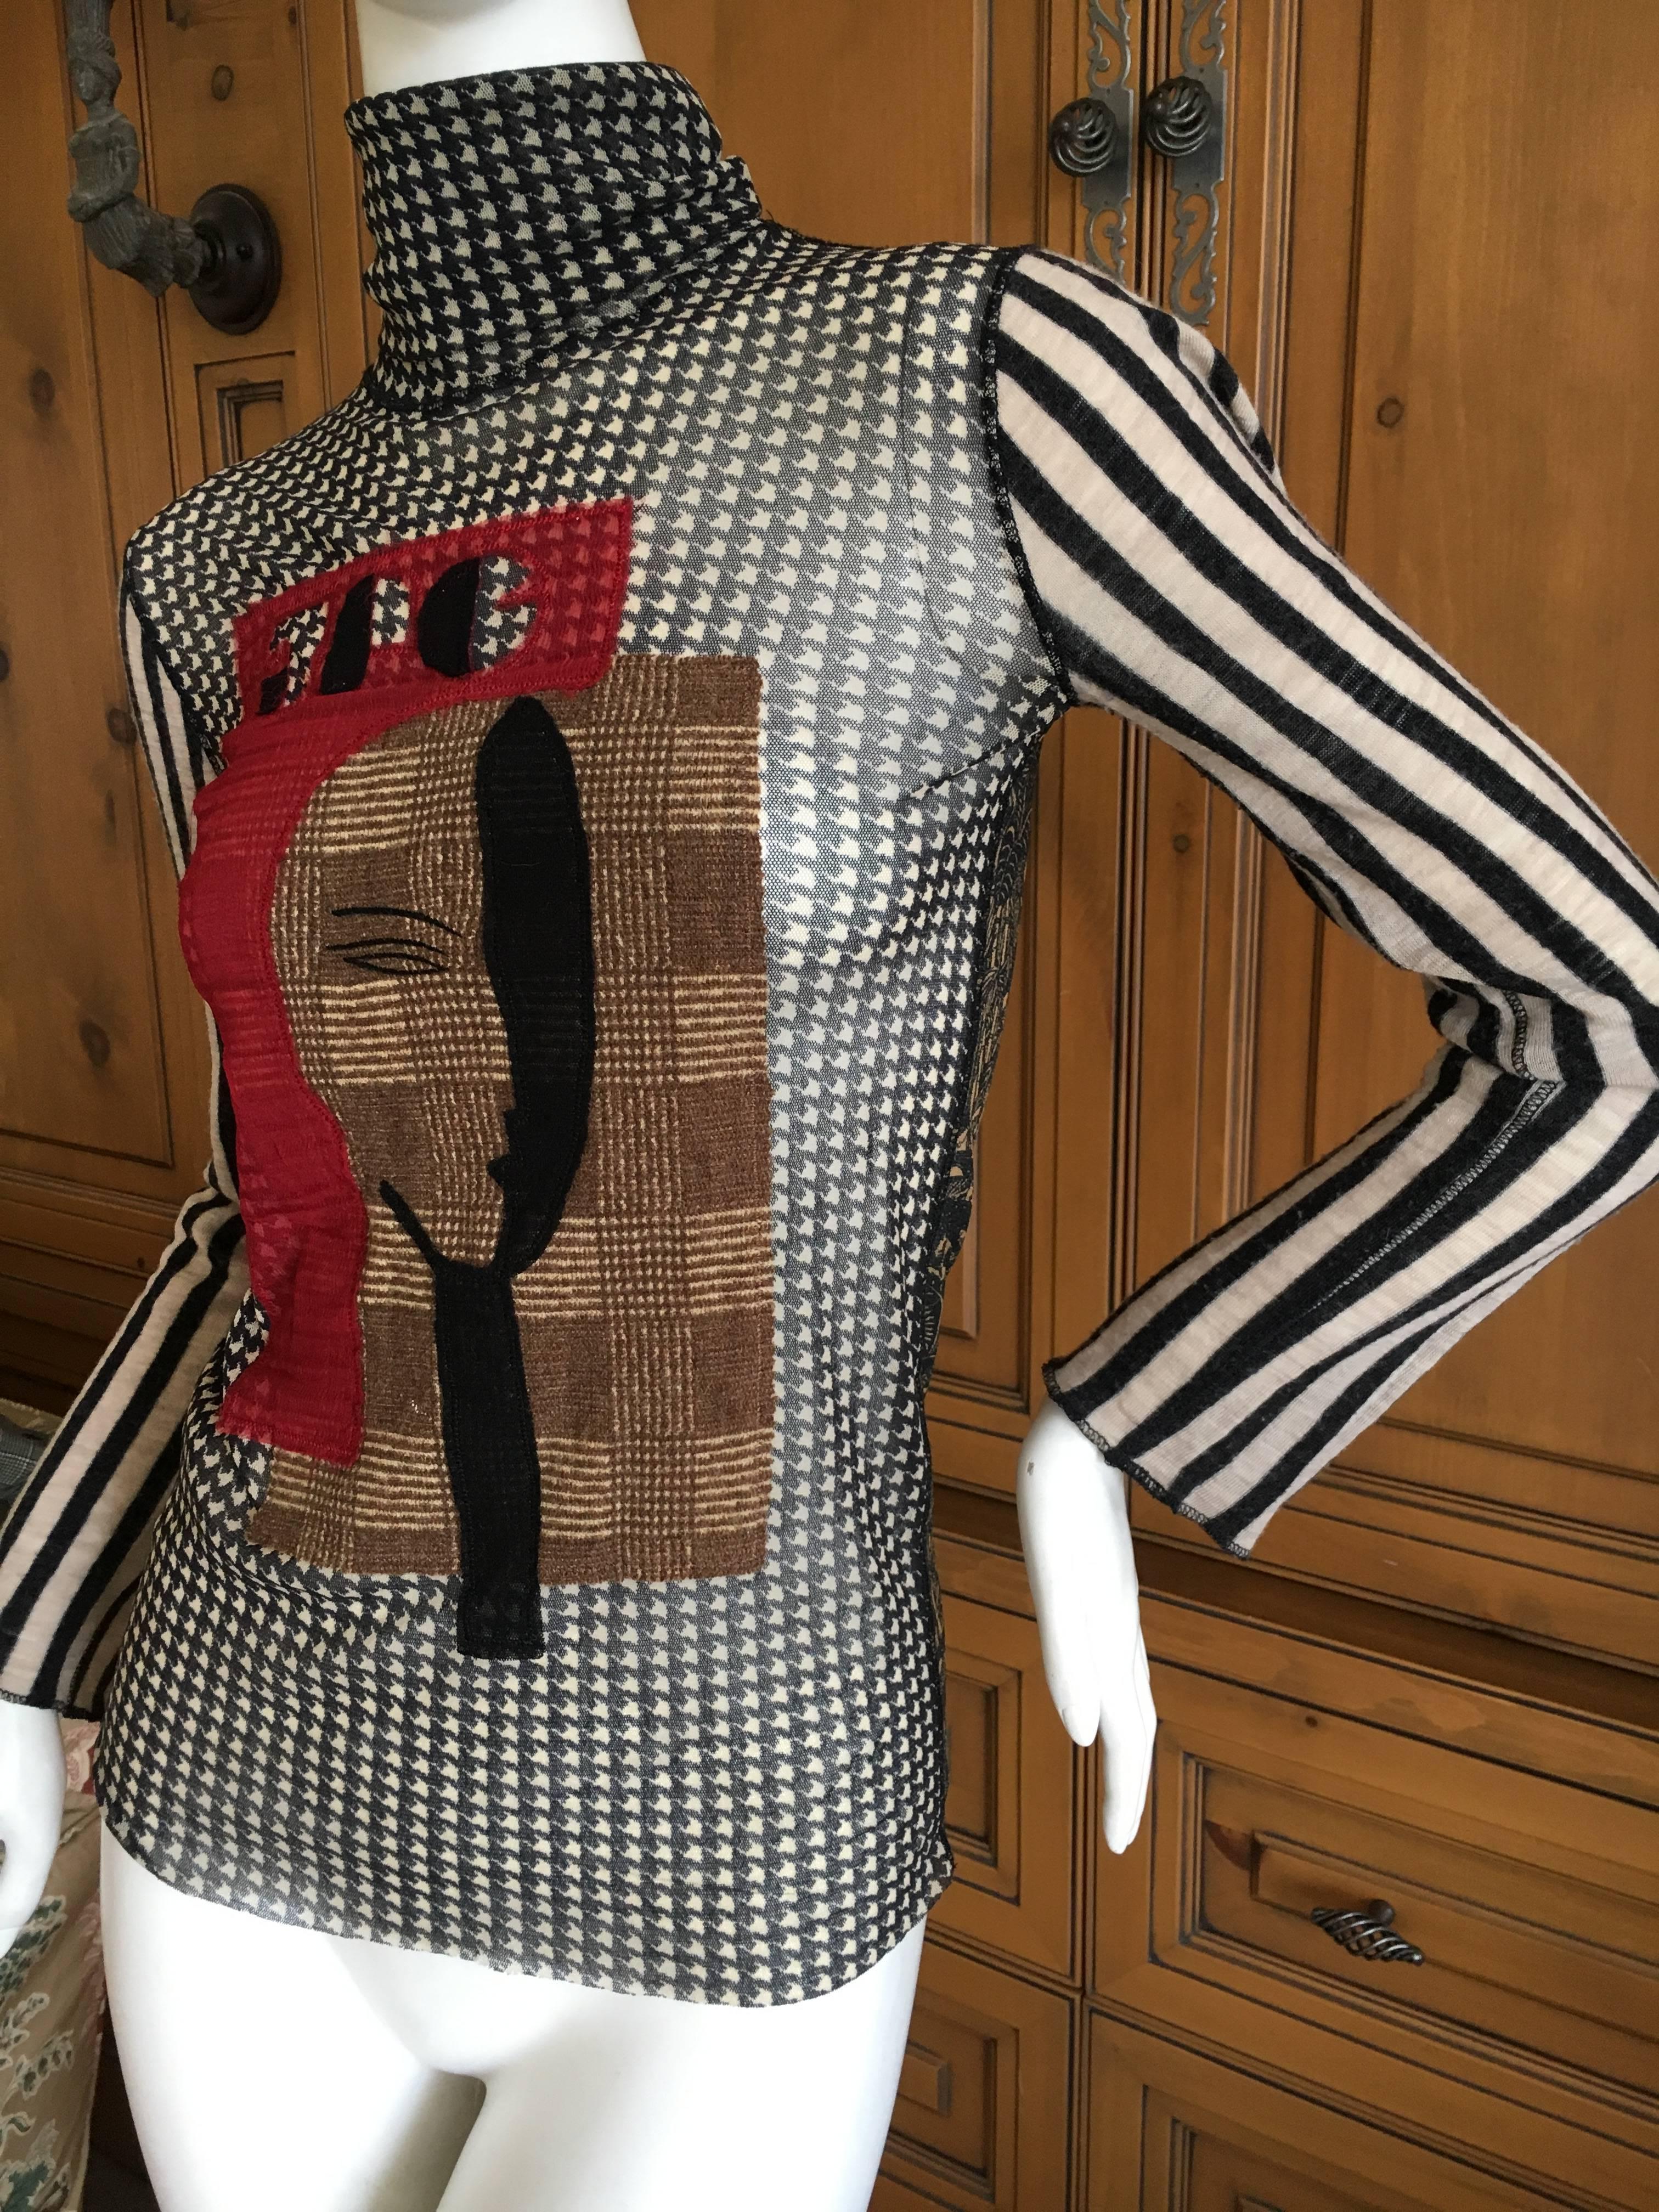 Jean Paul Gaultier Russian Deconstructive Collection Top In Excellent Condition For Sale In Cloverdale, CA